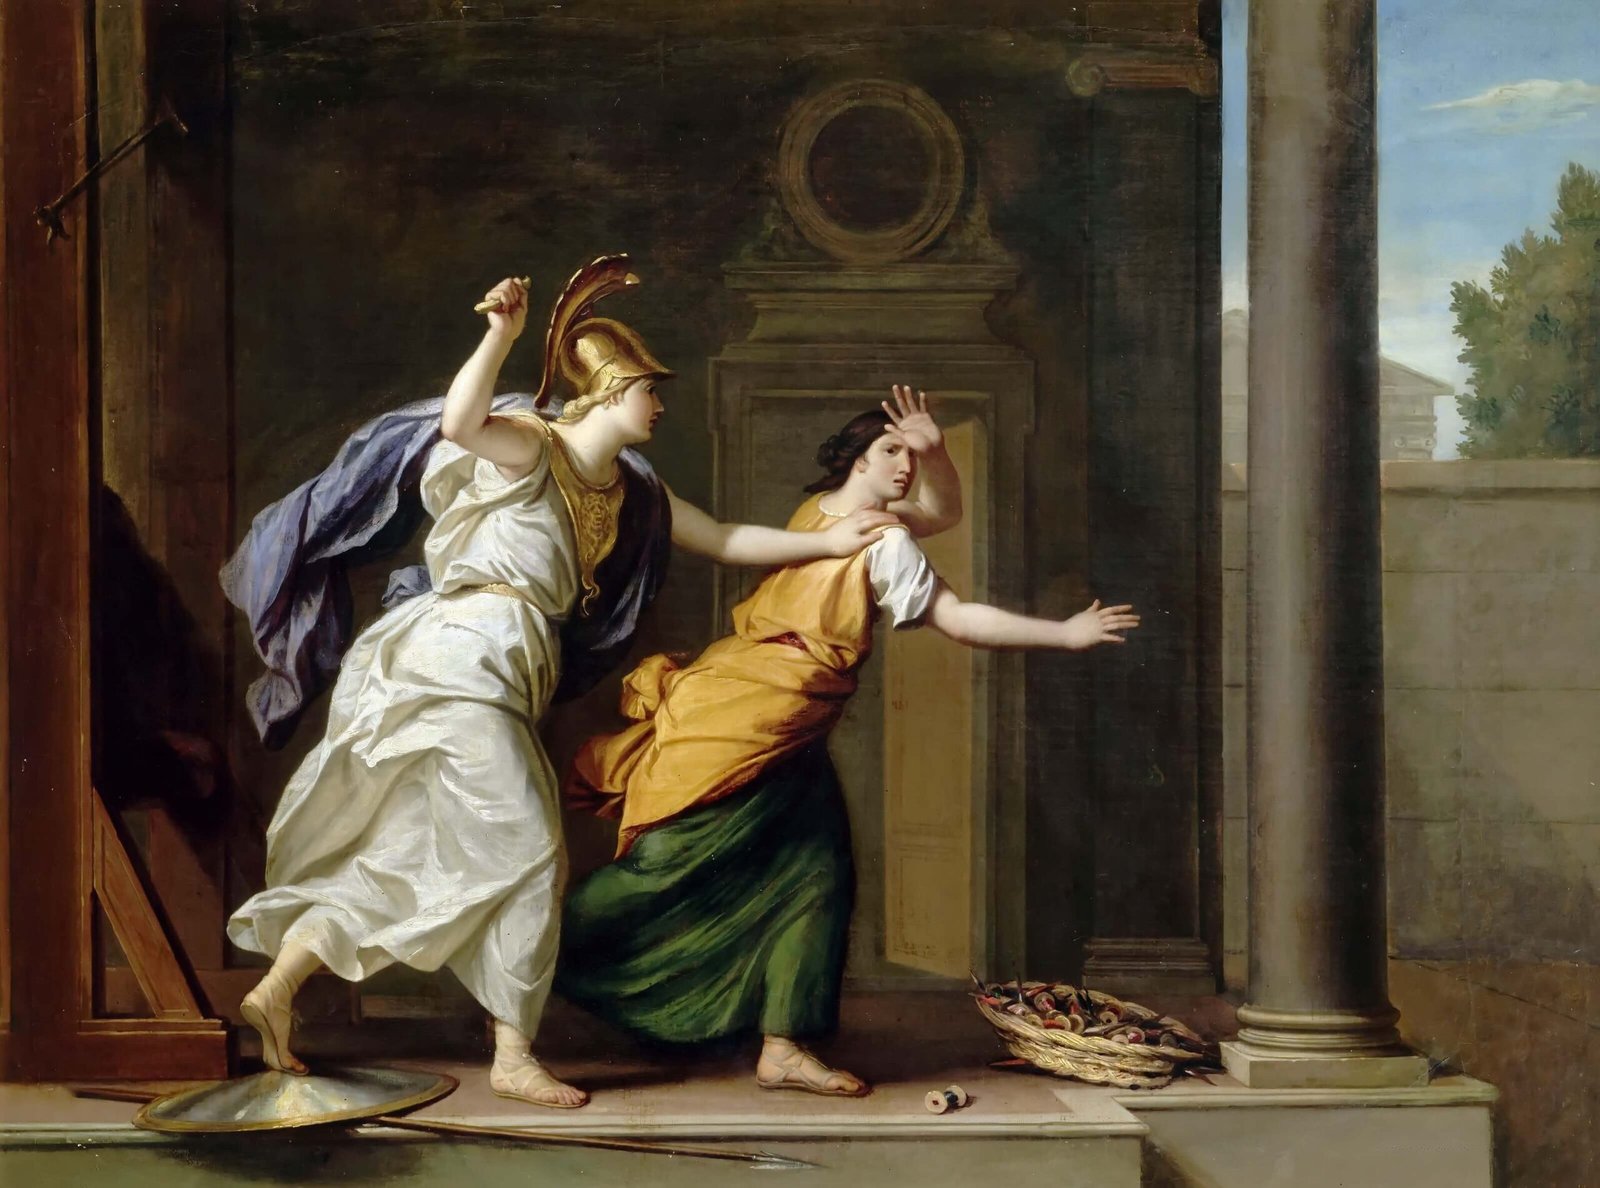 This painting represents the goddess of wisdom beating Arachne with her shuttle.